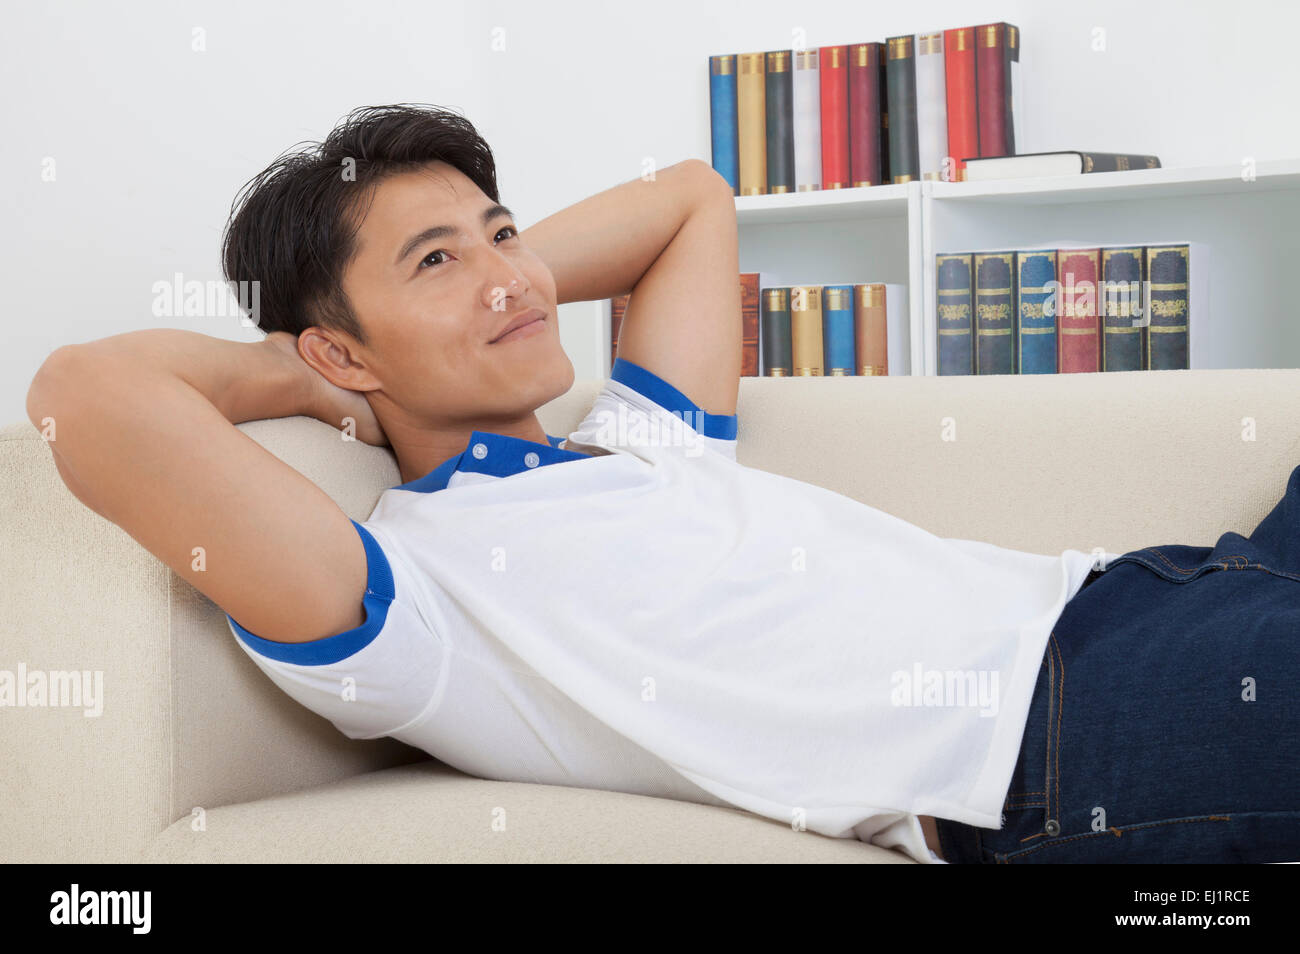 Man lying on back and relaxing with smile Stock Photo